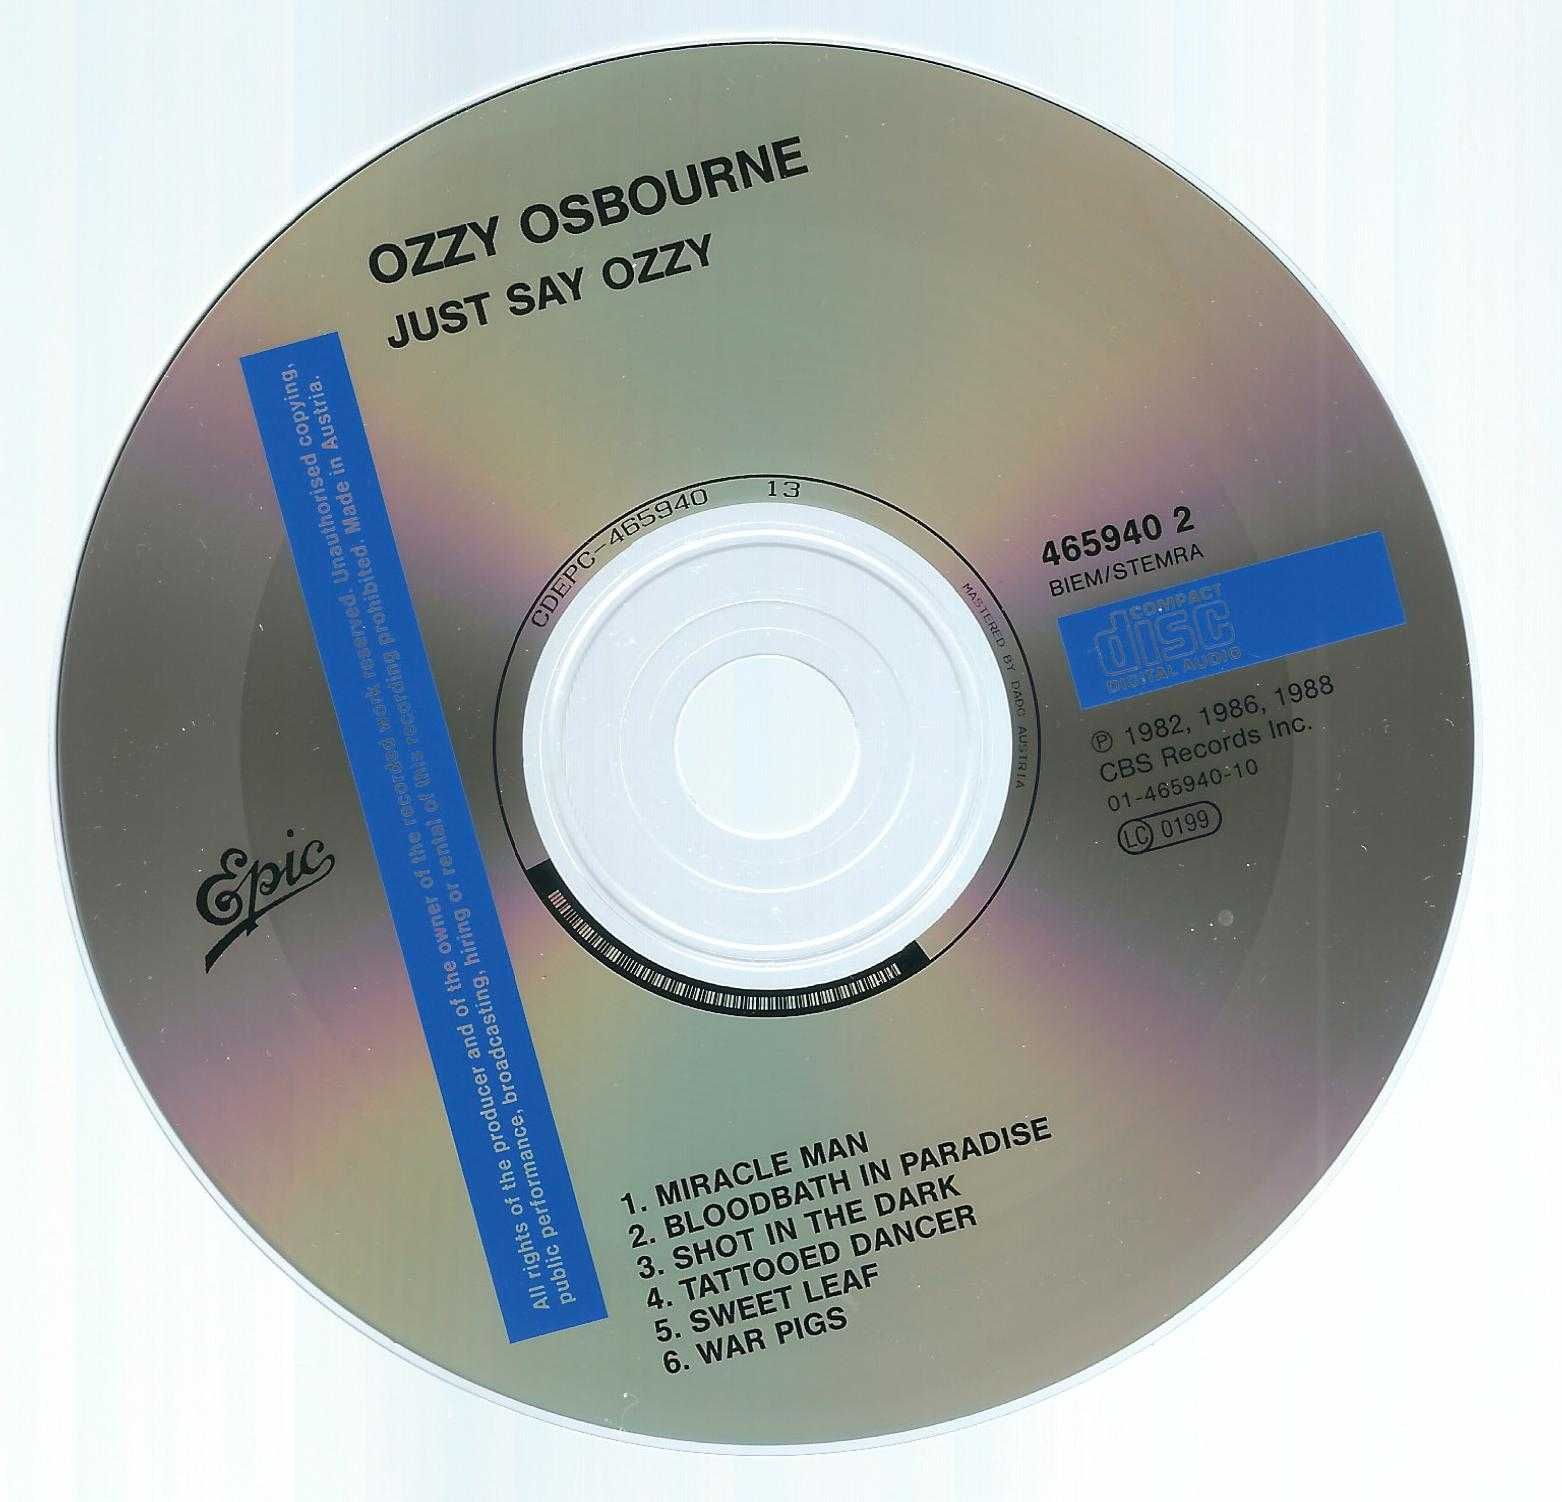 CD (EP) Ozzy Osbourne - Just Say Ozzy (1990) (Epic)